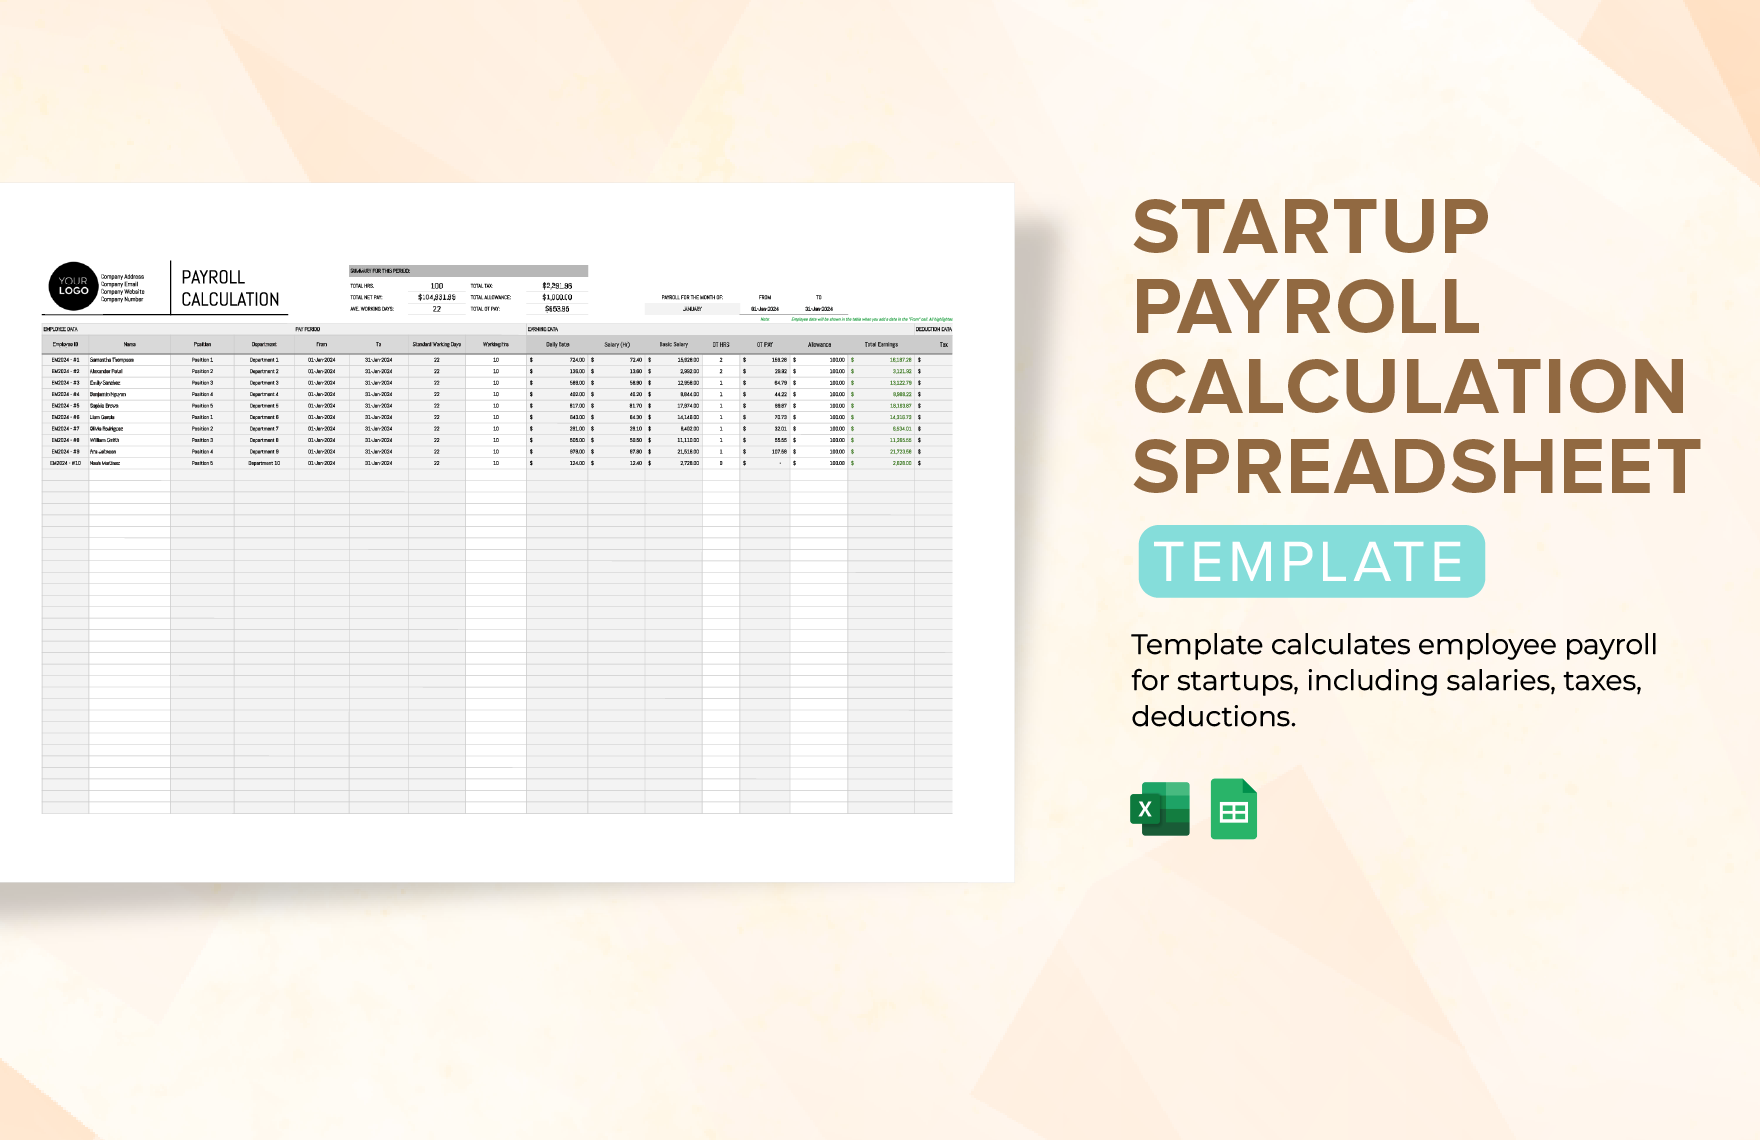 Startup Payroll Calculation Spreadsheet Template in Excel, Google Sheets